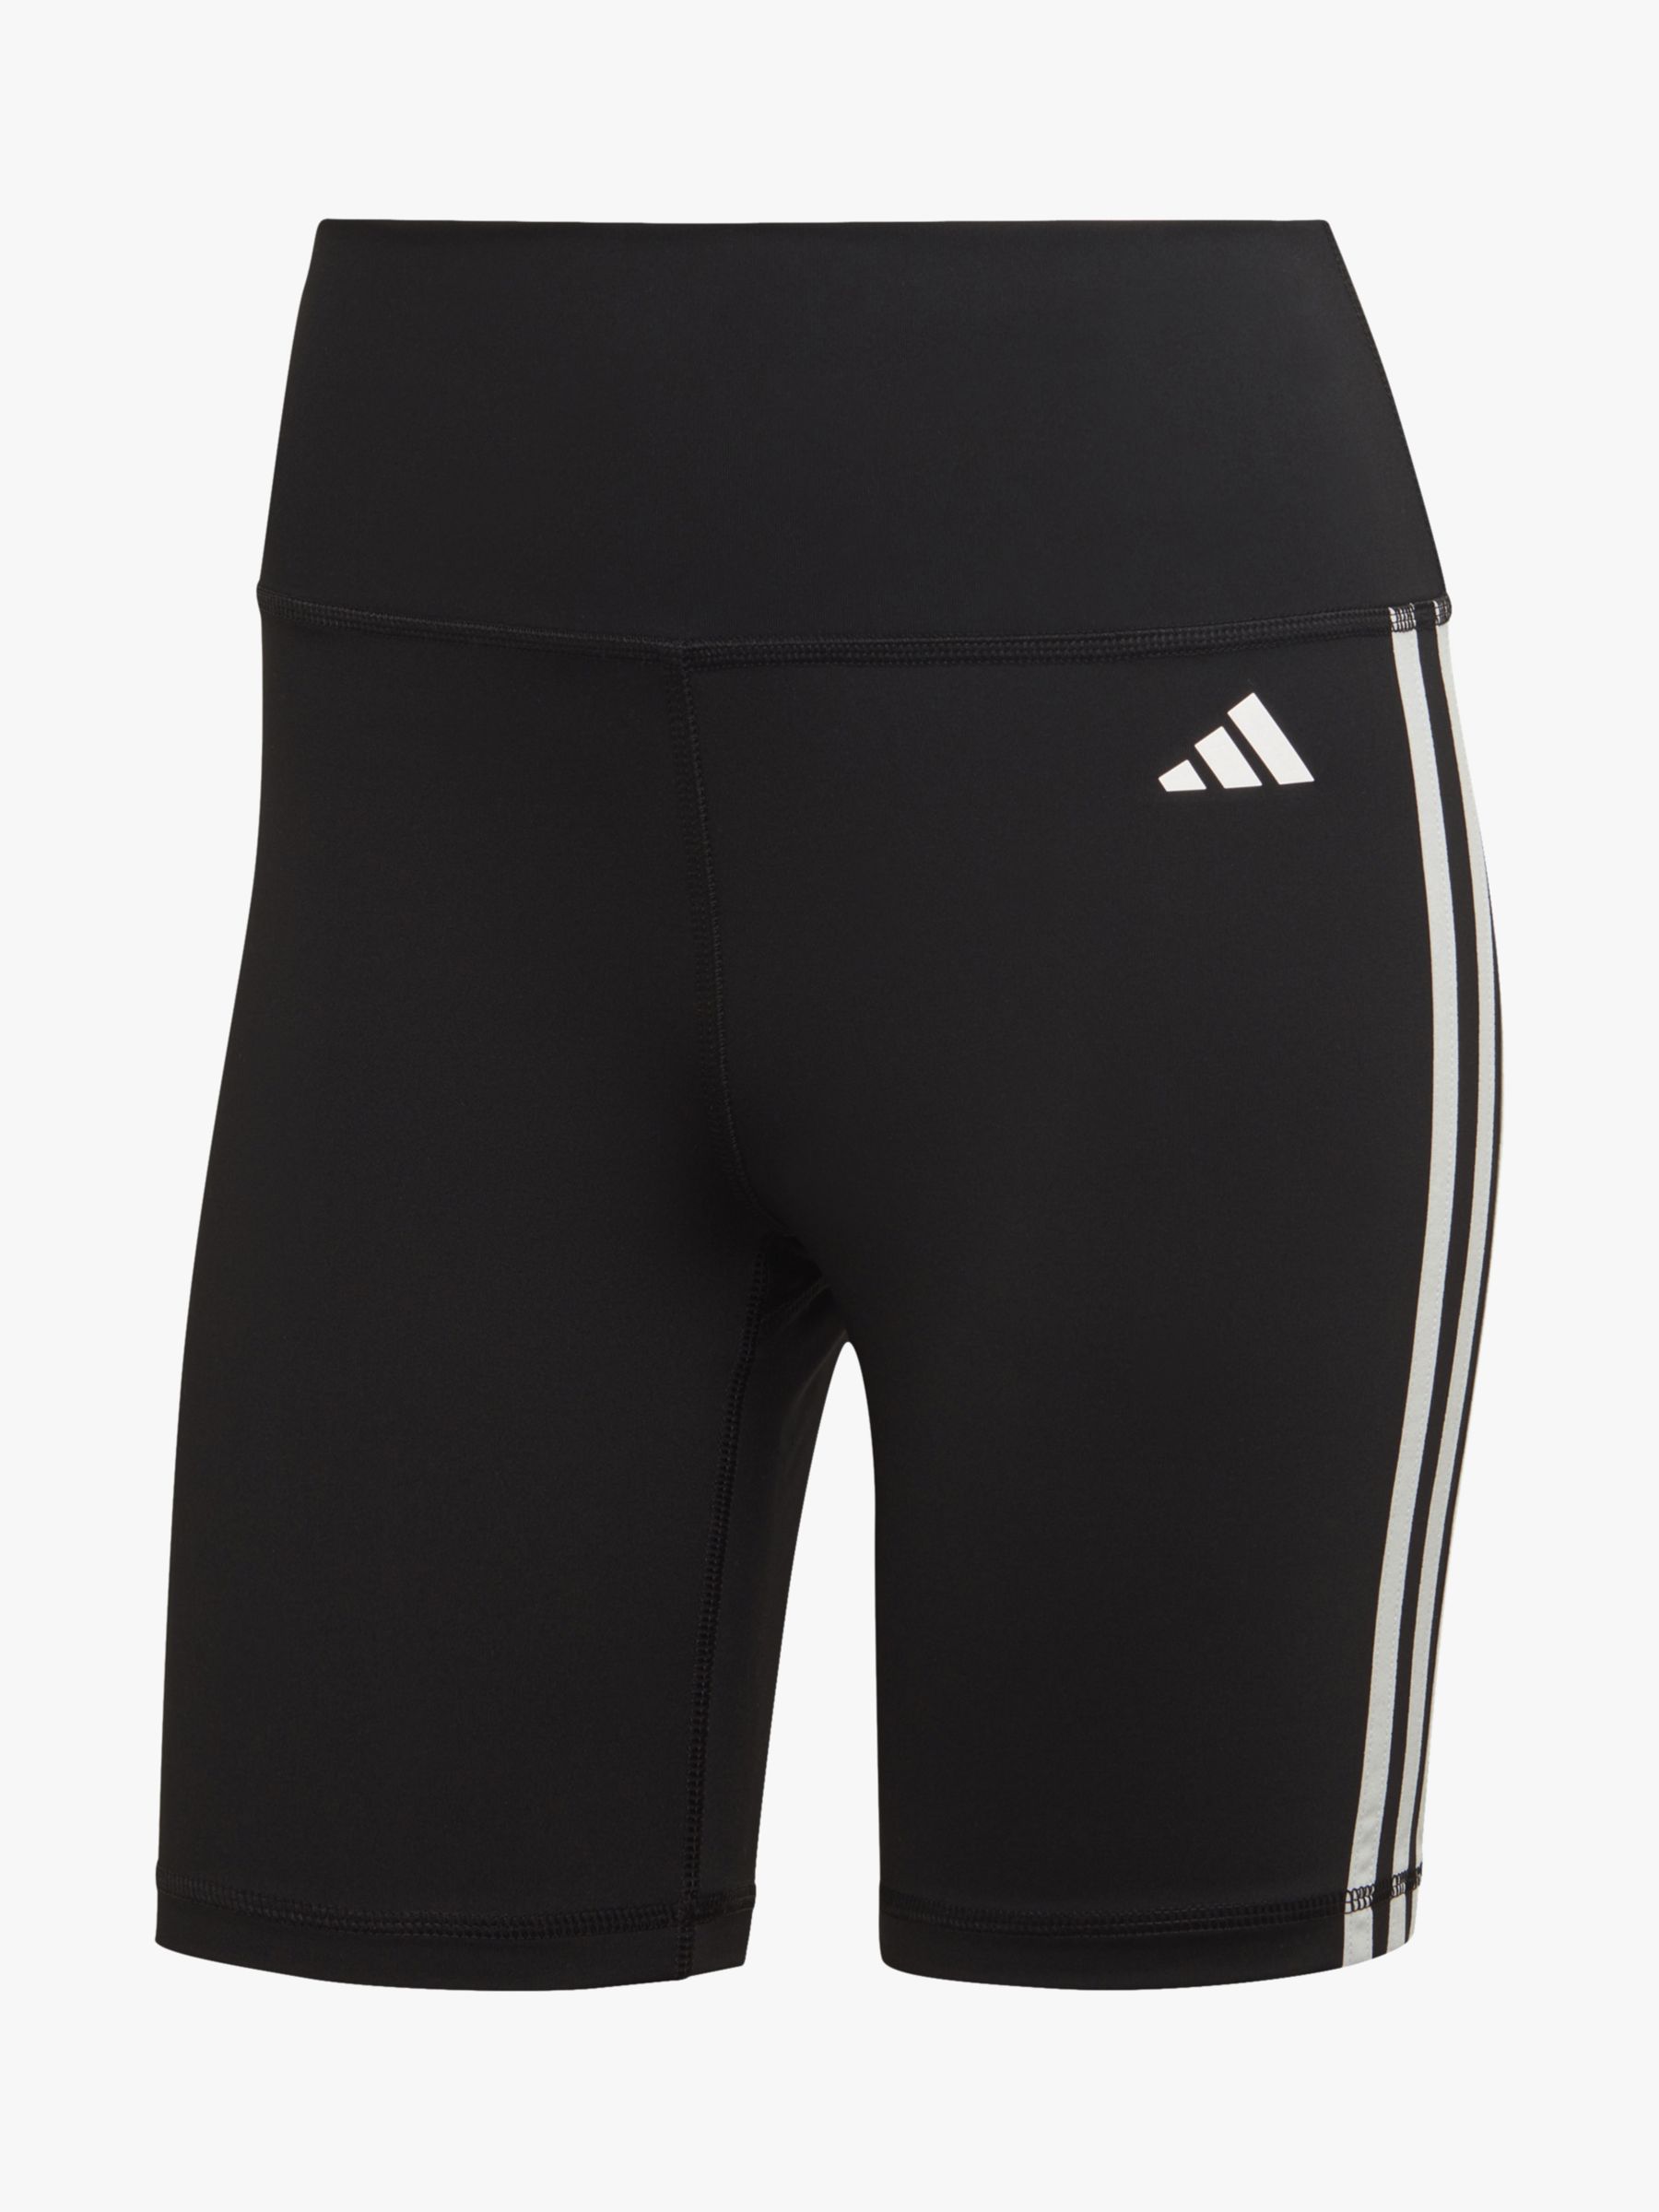 adidas Designed To Move High-Rise 3 Stripes Sport Shorts, Black, XS